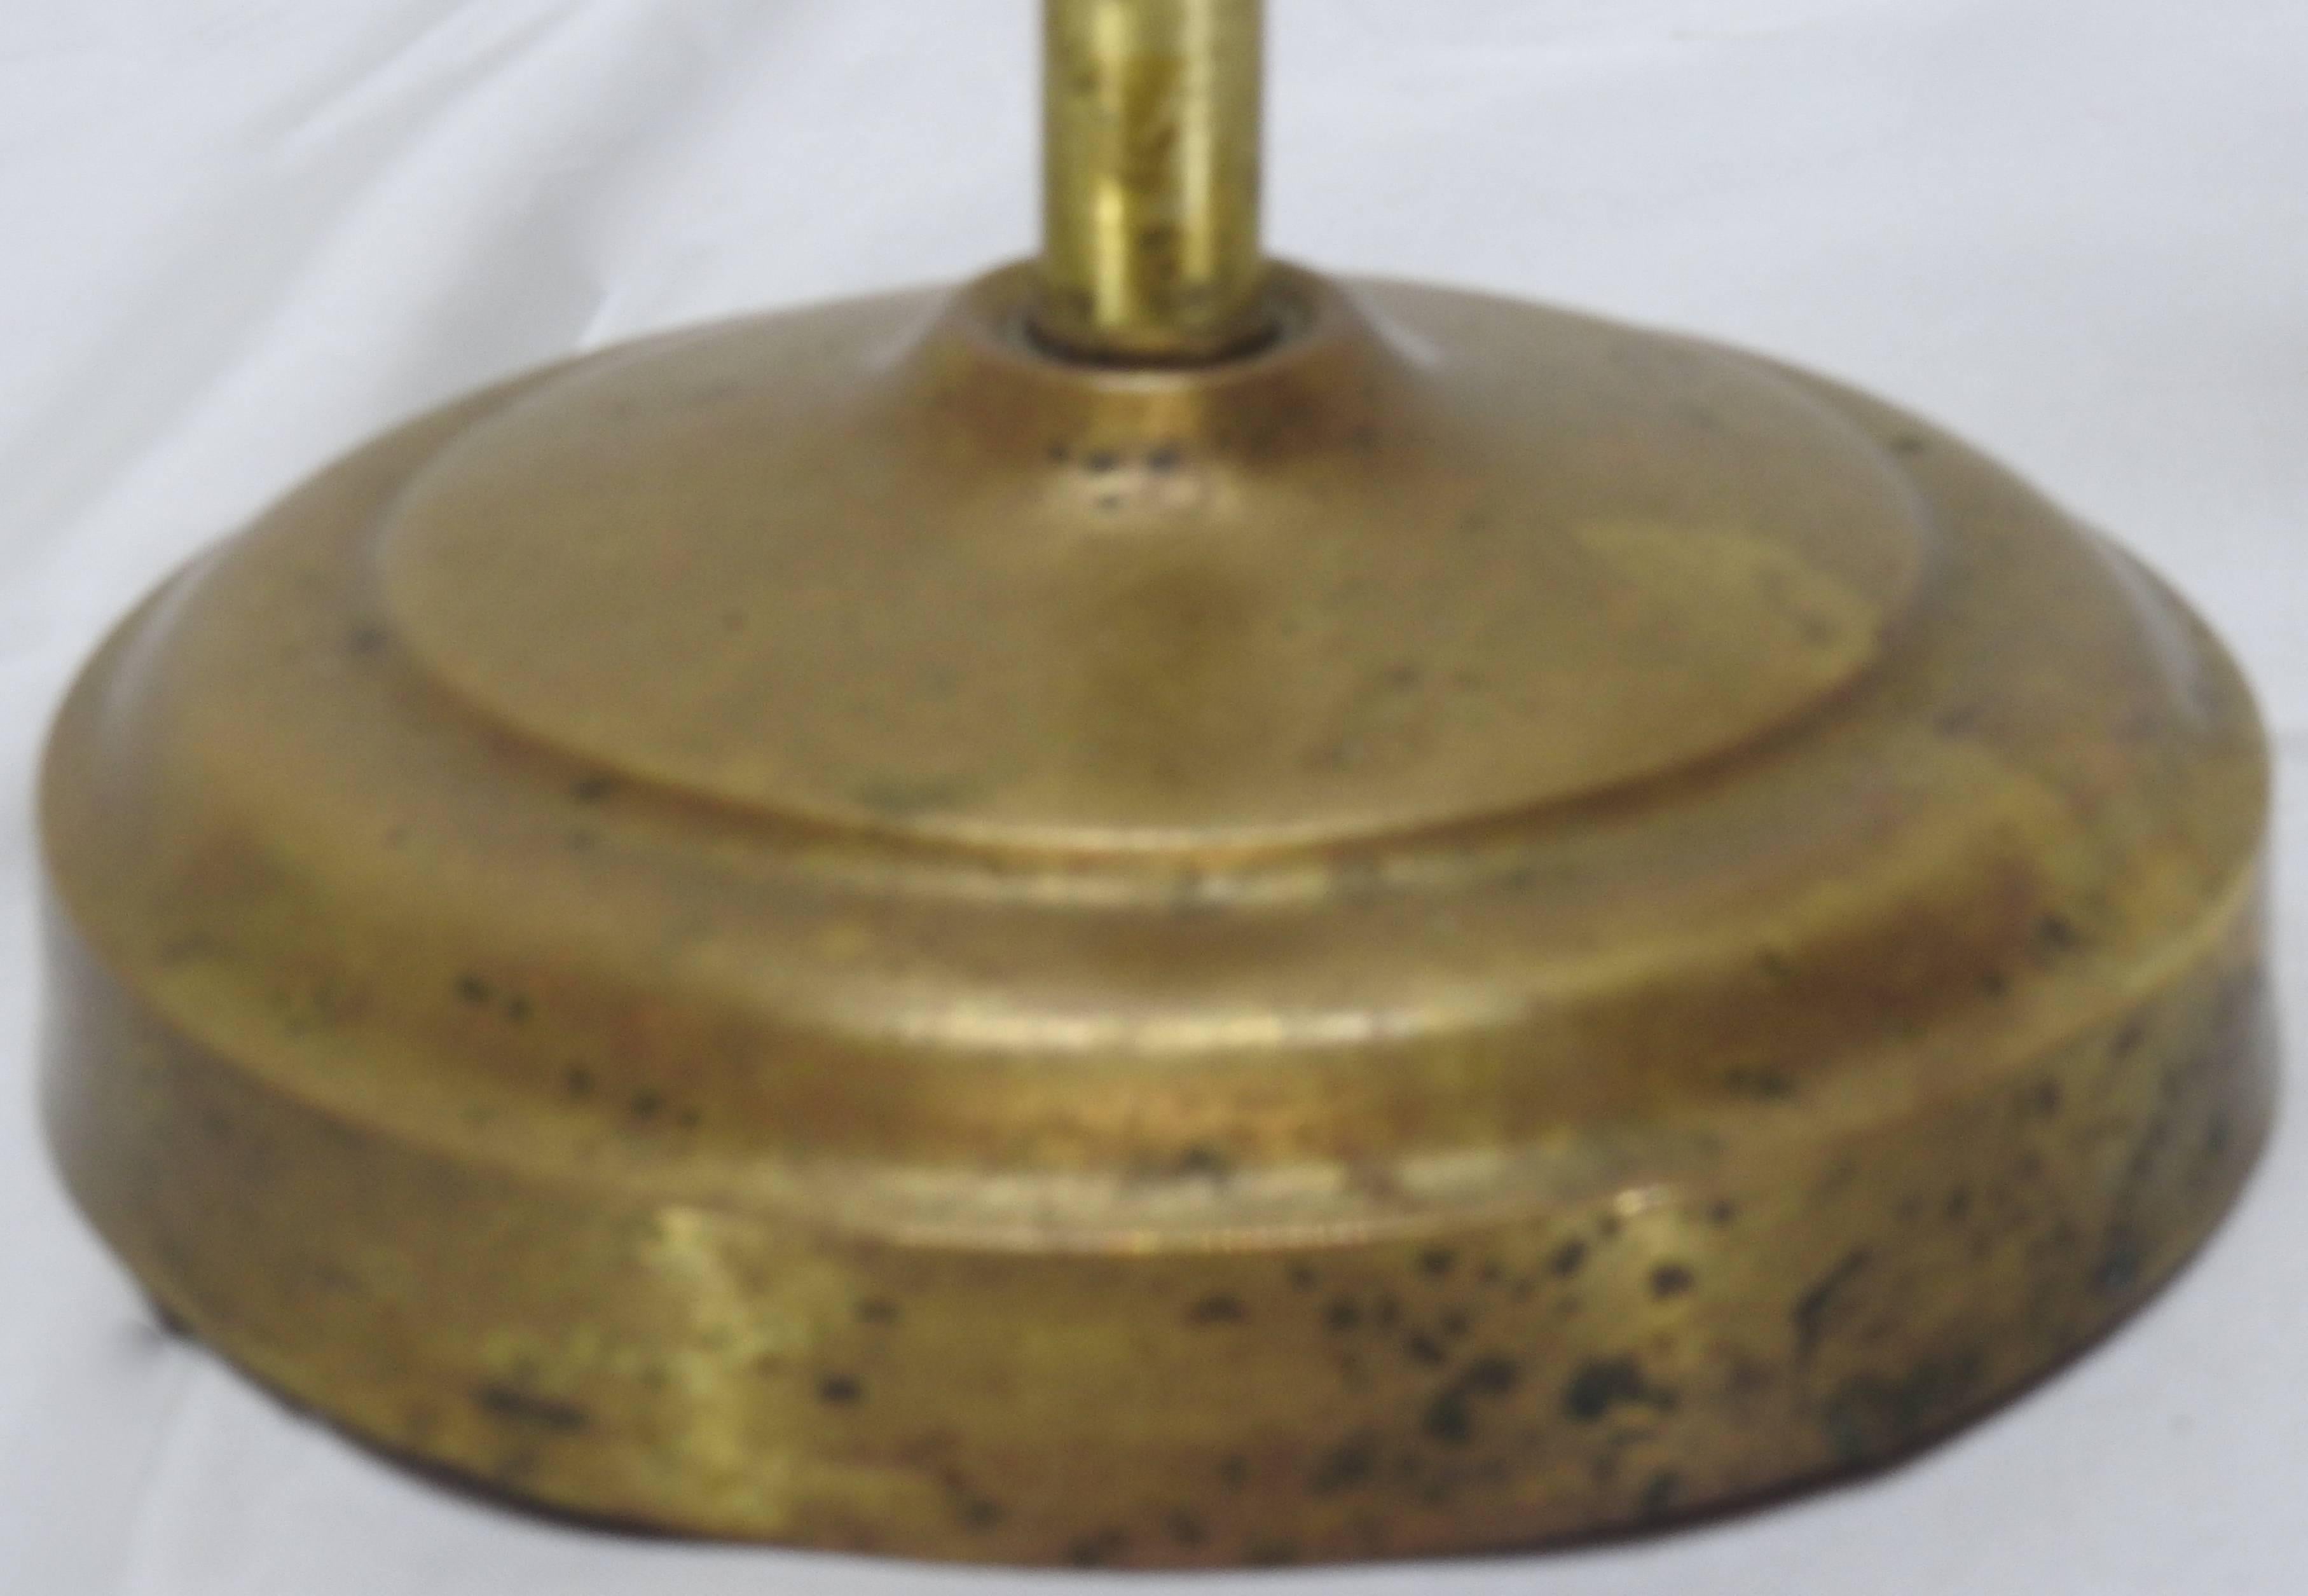 American Industrial Magnifier on Stand Solid Brass